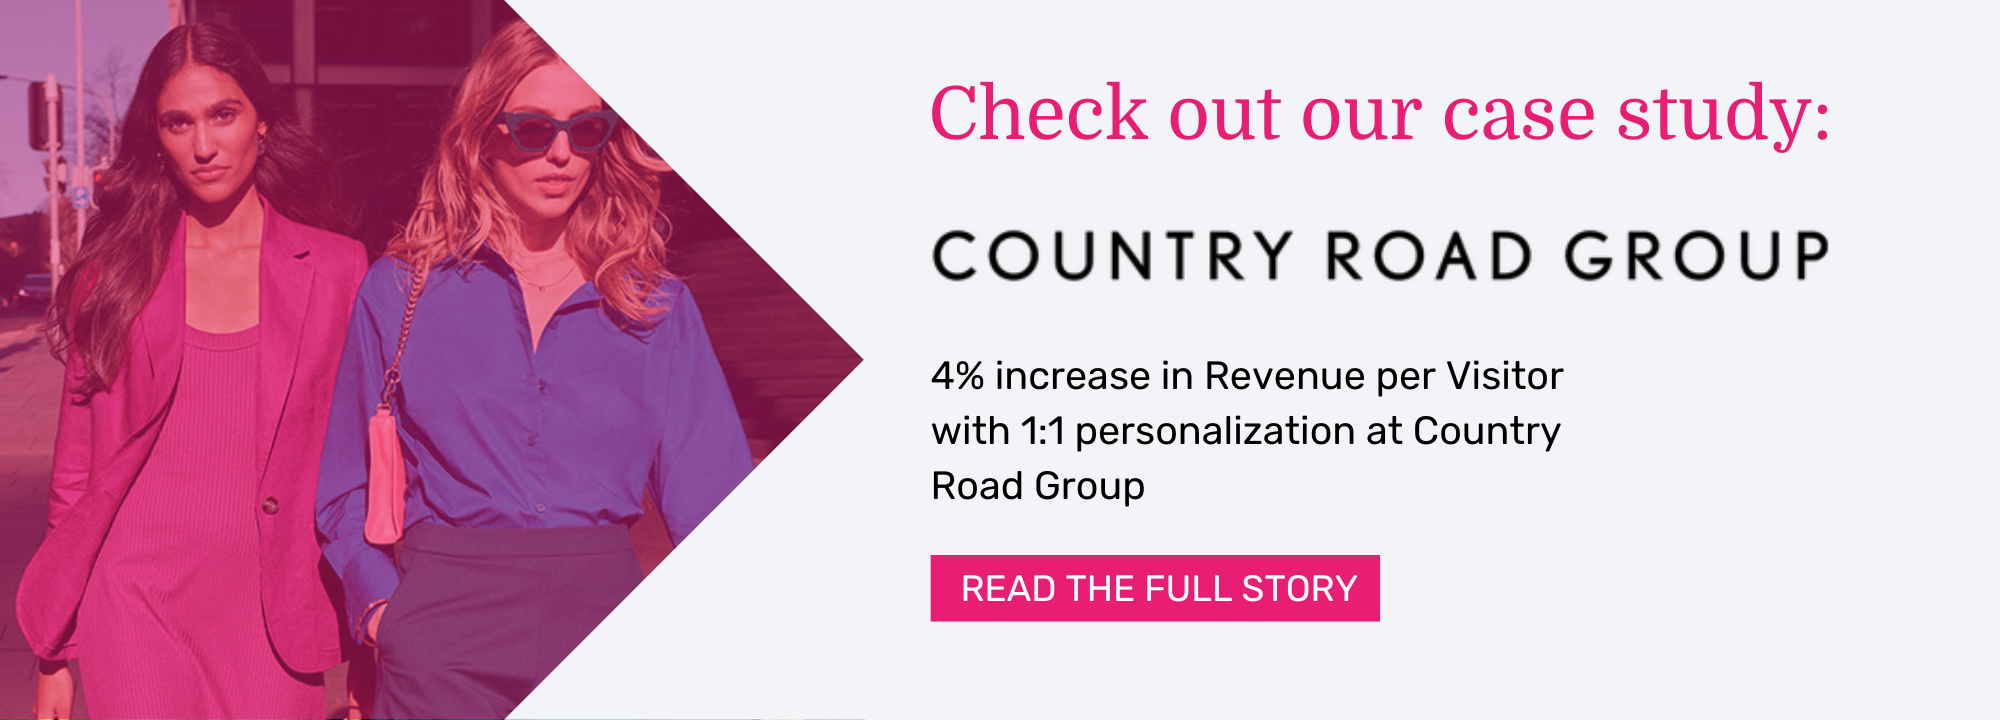 4% increase in Revenue per Visitor with 1:1 personalization at Country Road Group